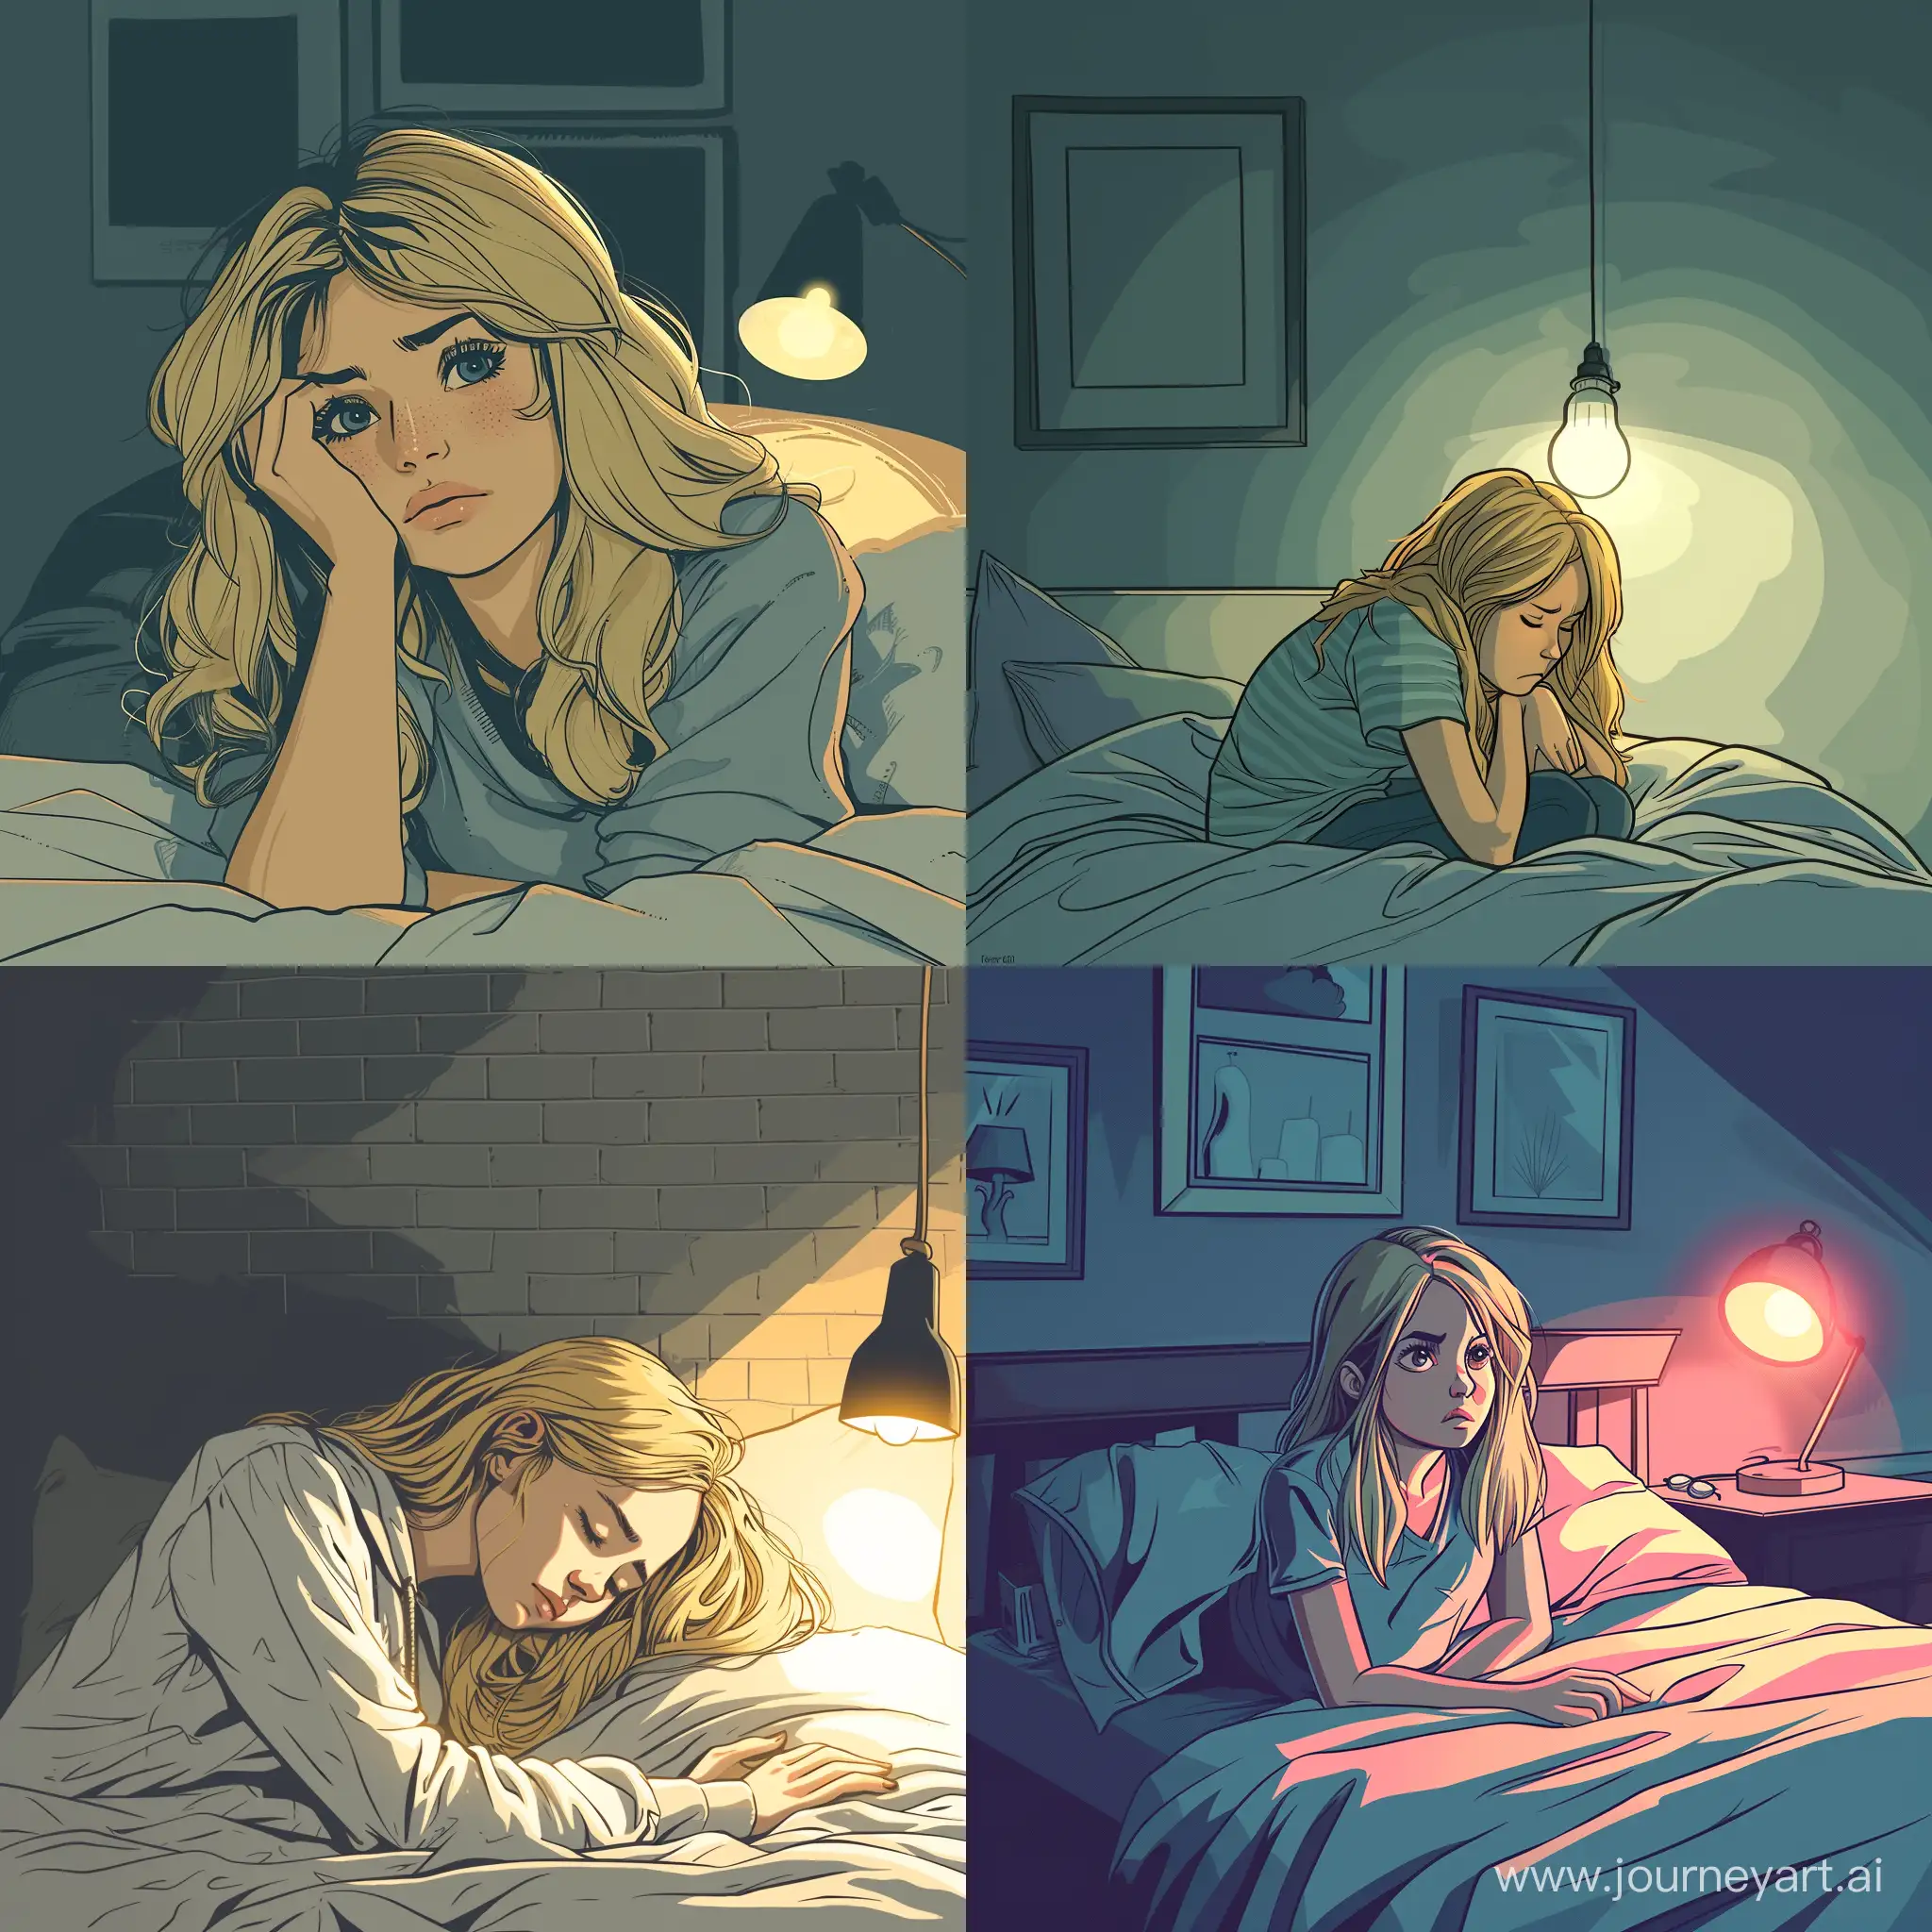 Fatigued-BlondHaired-Girl-Rests-in-Dimly-Lit-Room-Modern-American-Comic-Style